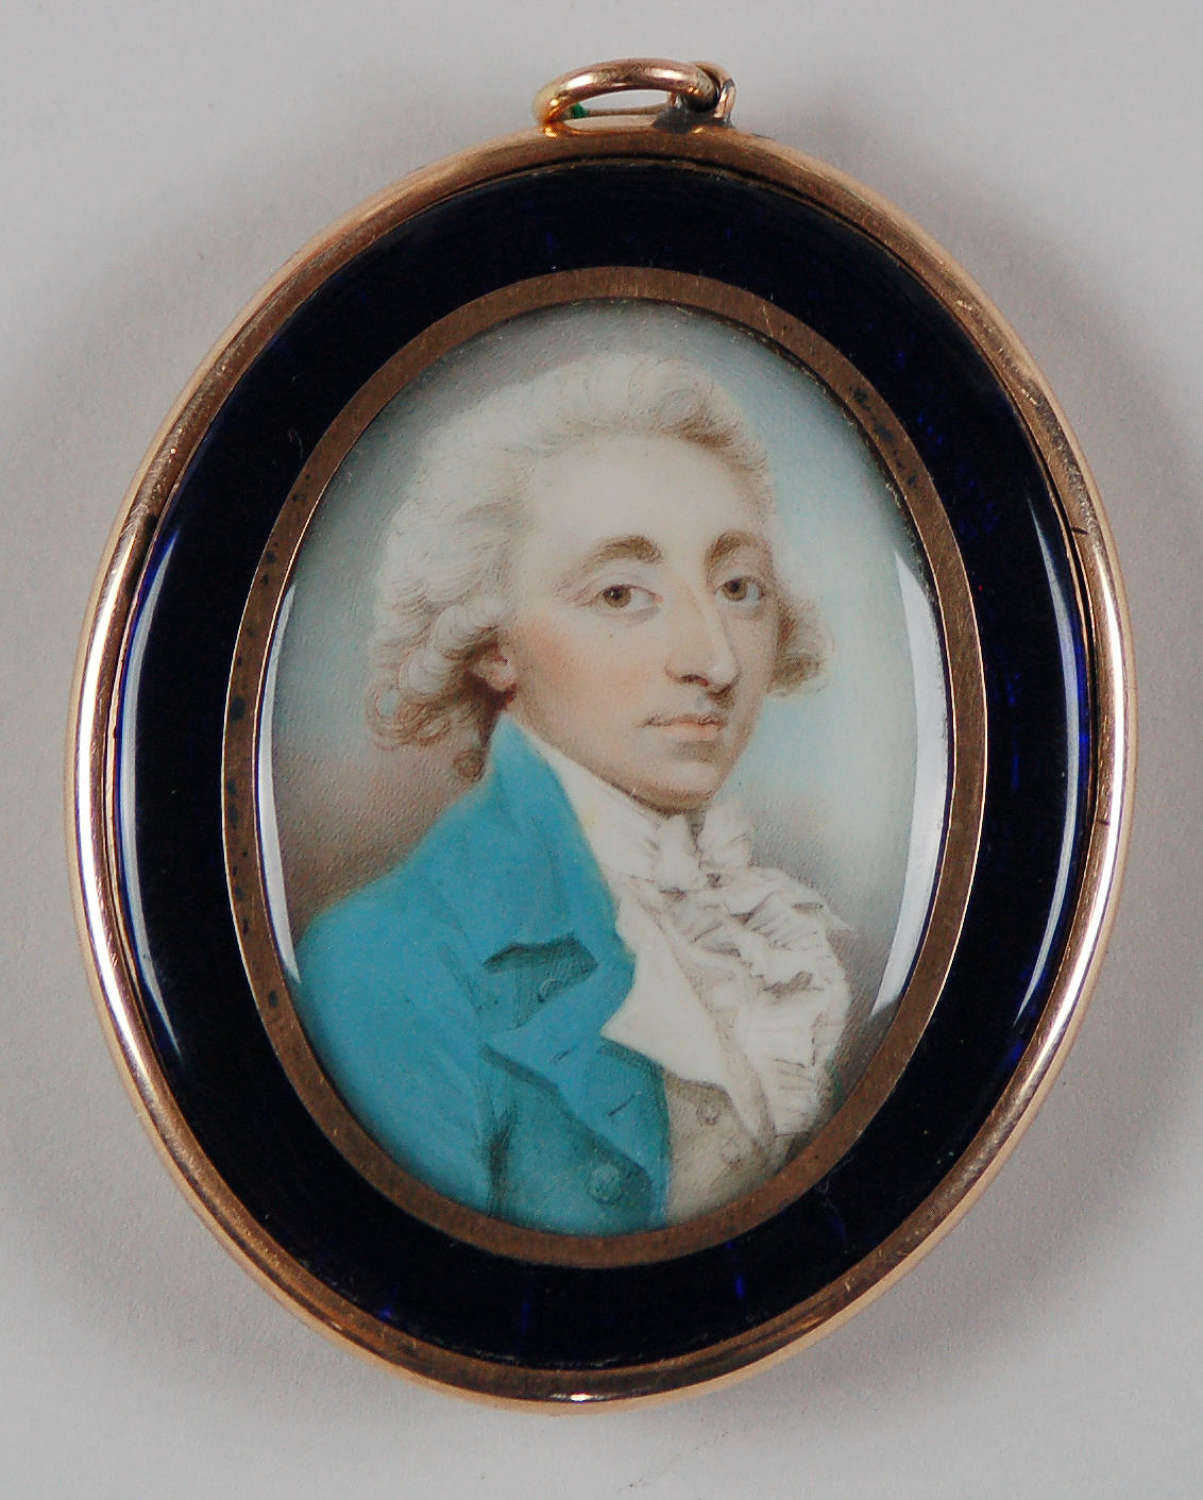 Miniature of gent by Charles Shireff C1790